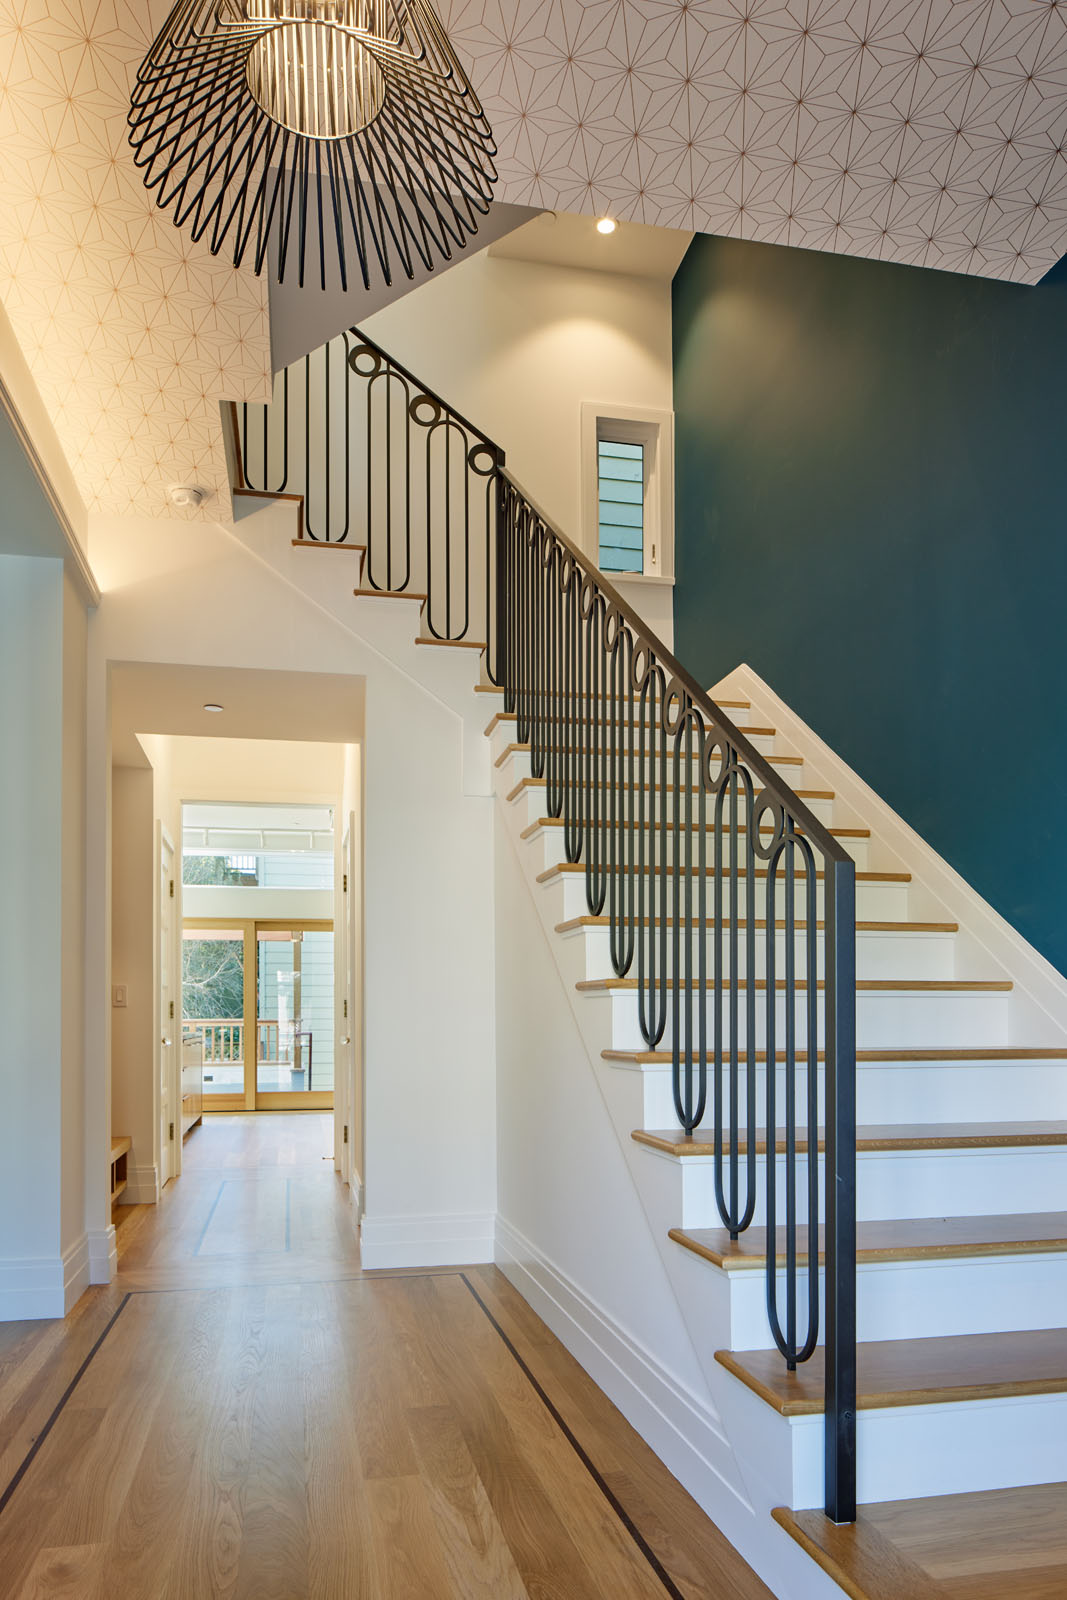 We designed a new custom metal decorative railing for the stairs then stacked a new 3 flight stair to reach the legalized attic space.